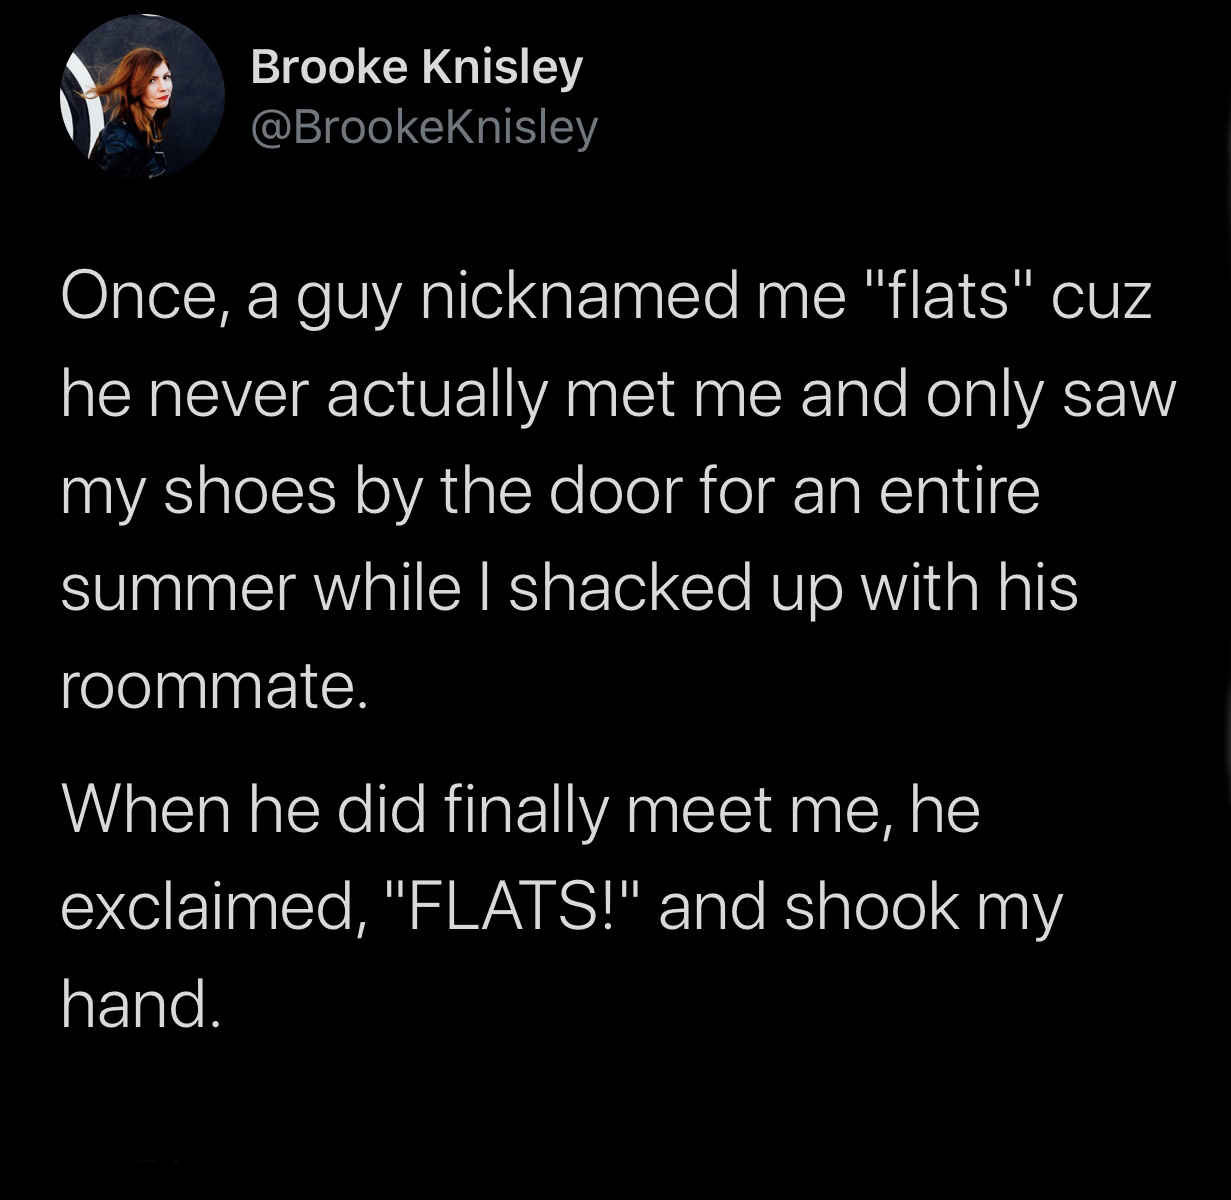 BTS - Brooke Knisley Once, a guy nicknamed me "flats" cuz he never actually met me and only saw my shoes by the door for an entire summer while I shacked up with his roommate. When he did finally meet me, he exclaimed, "Flats!" and shook my hand.